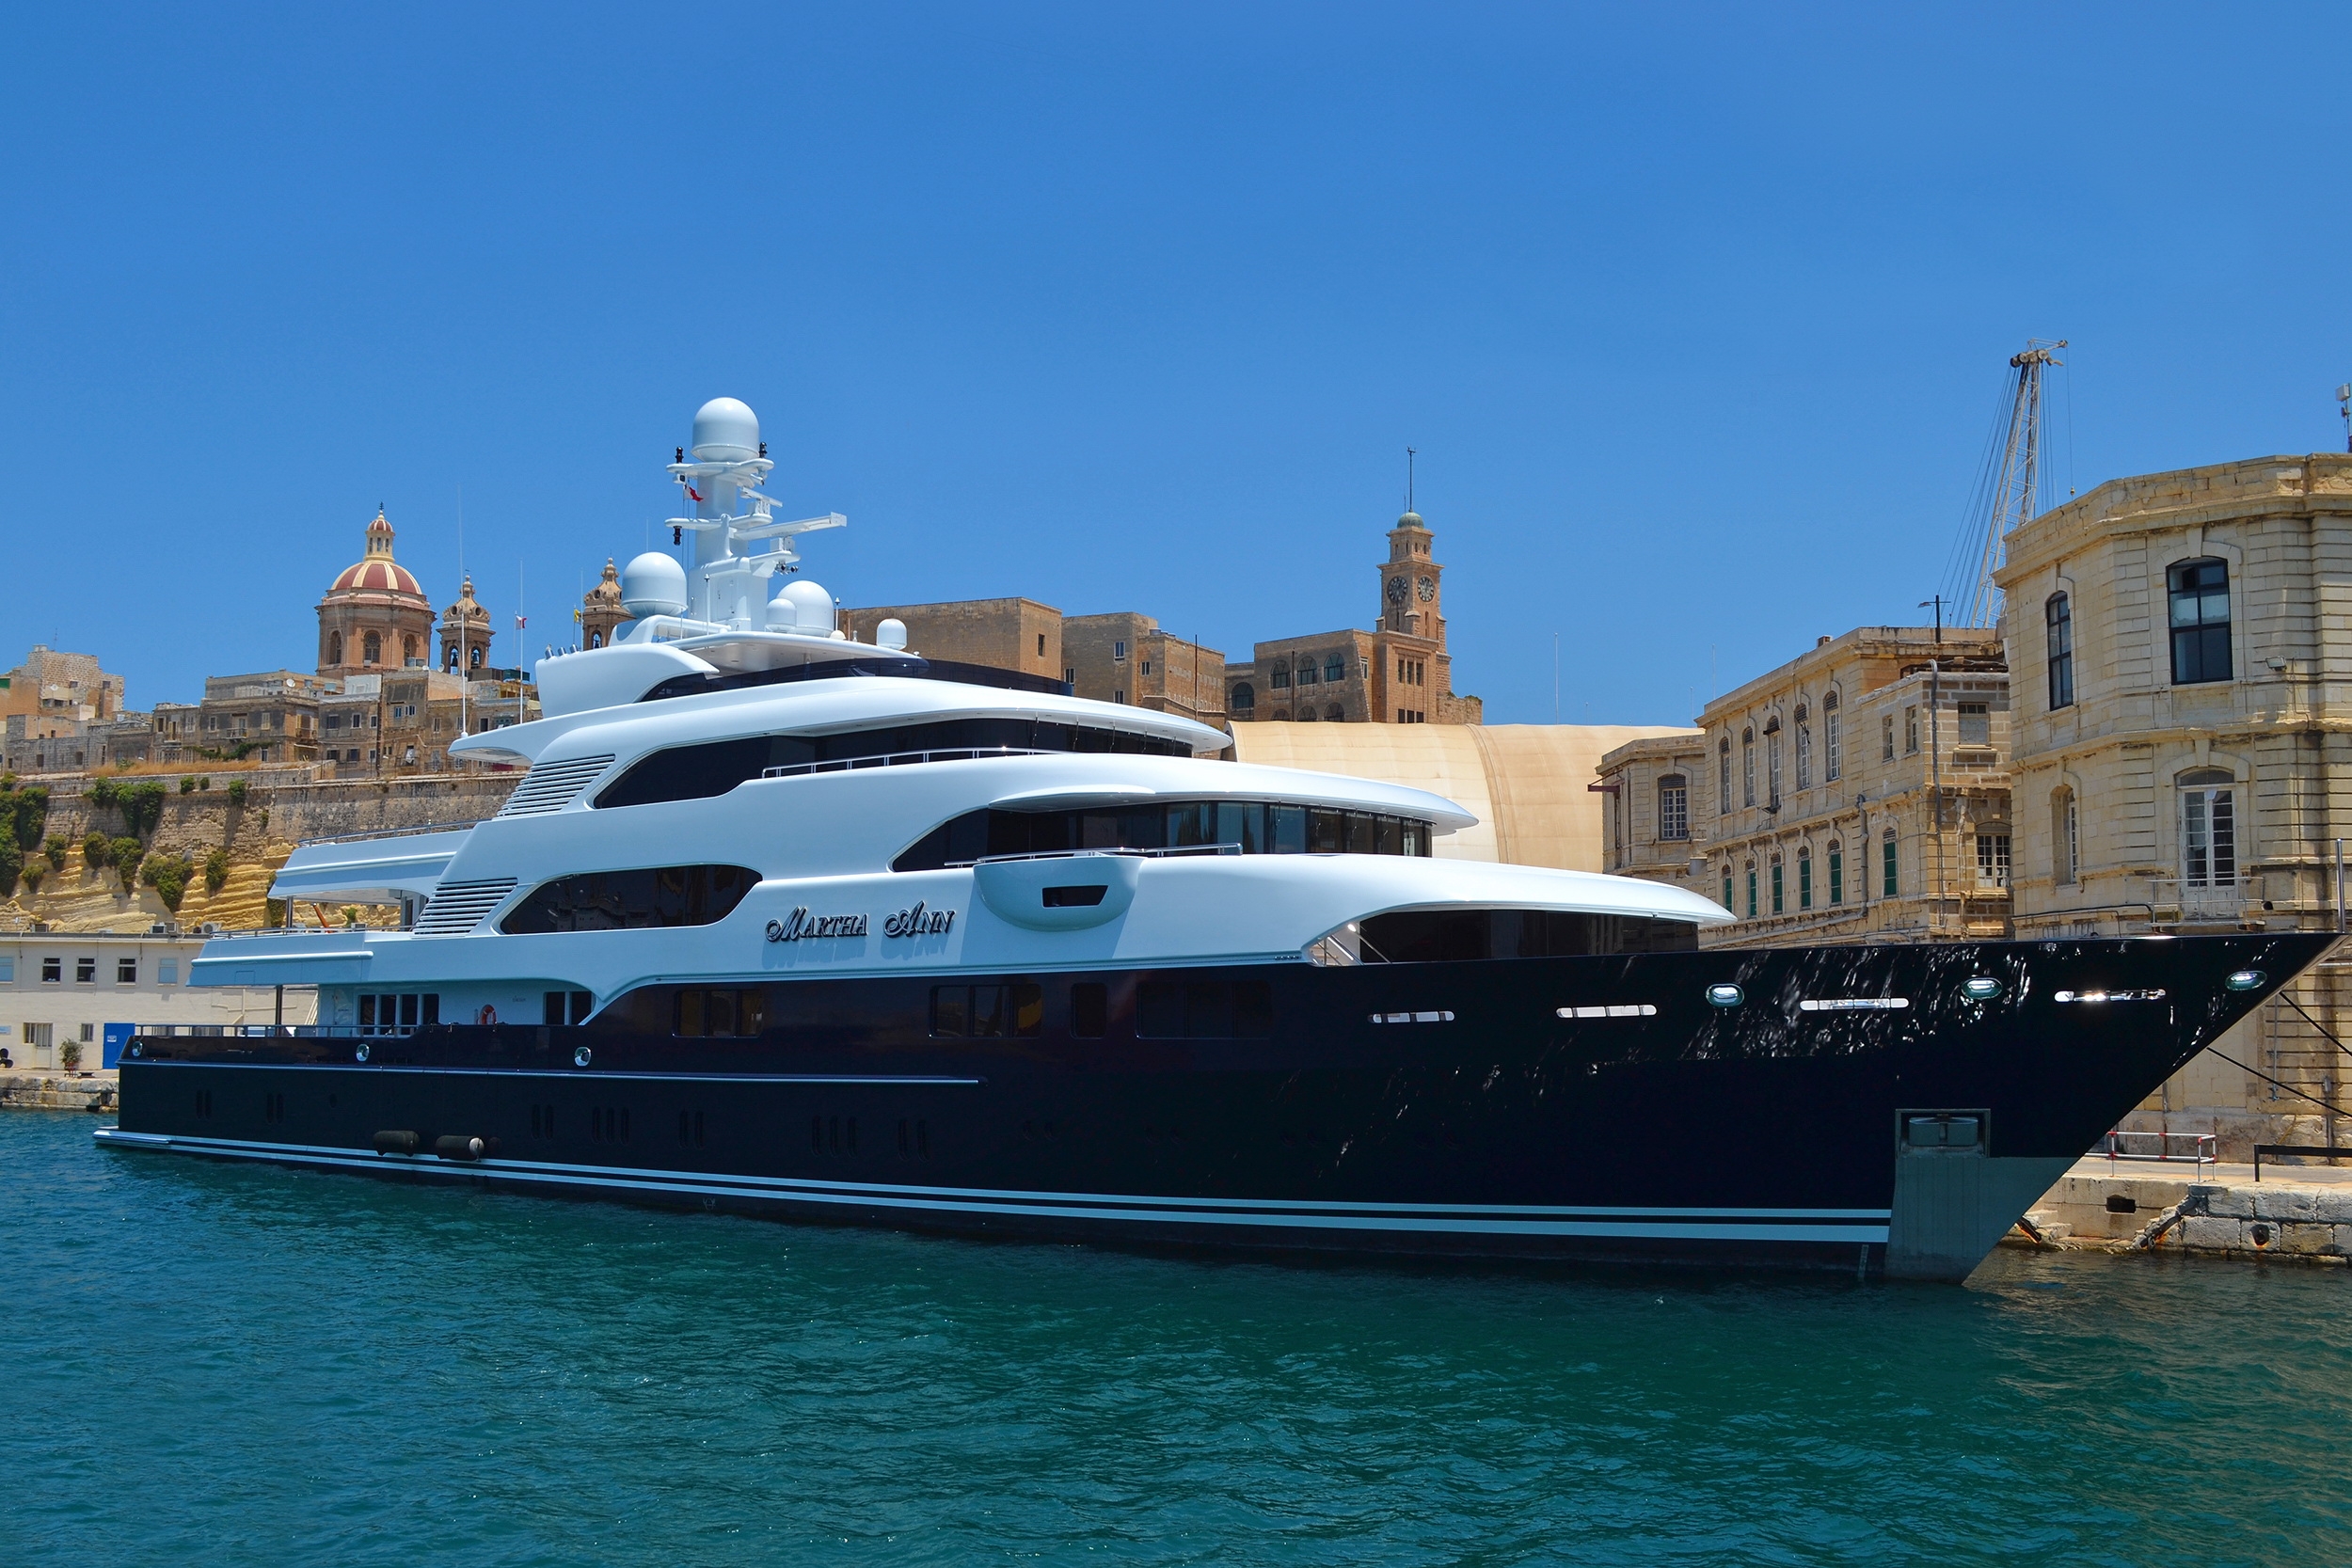 it's beautiful, yacht, sea, miscellanea, miscellaneous, boat, ship, handsomely, luxury